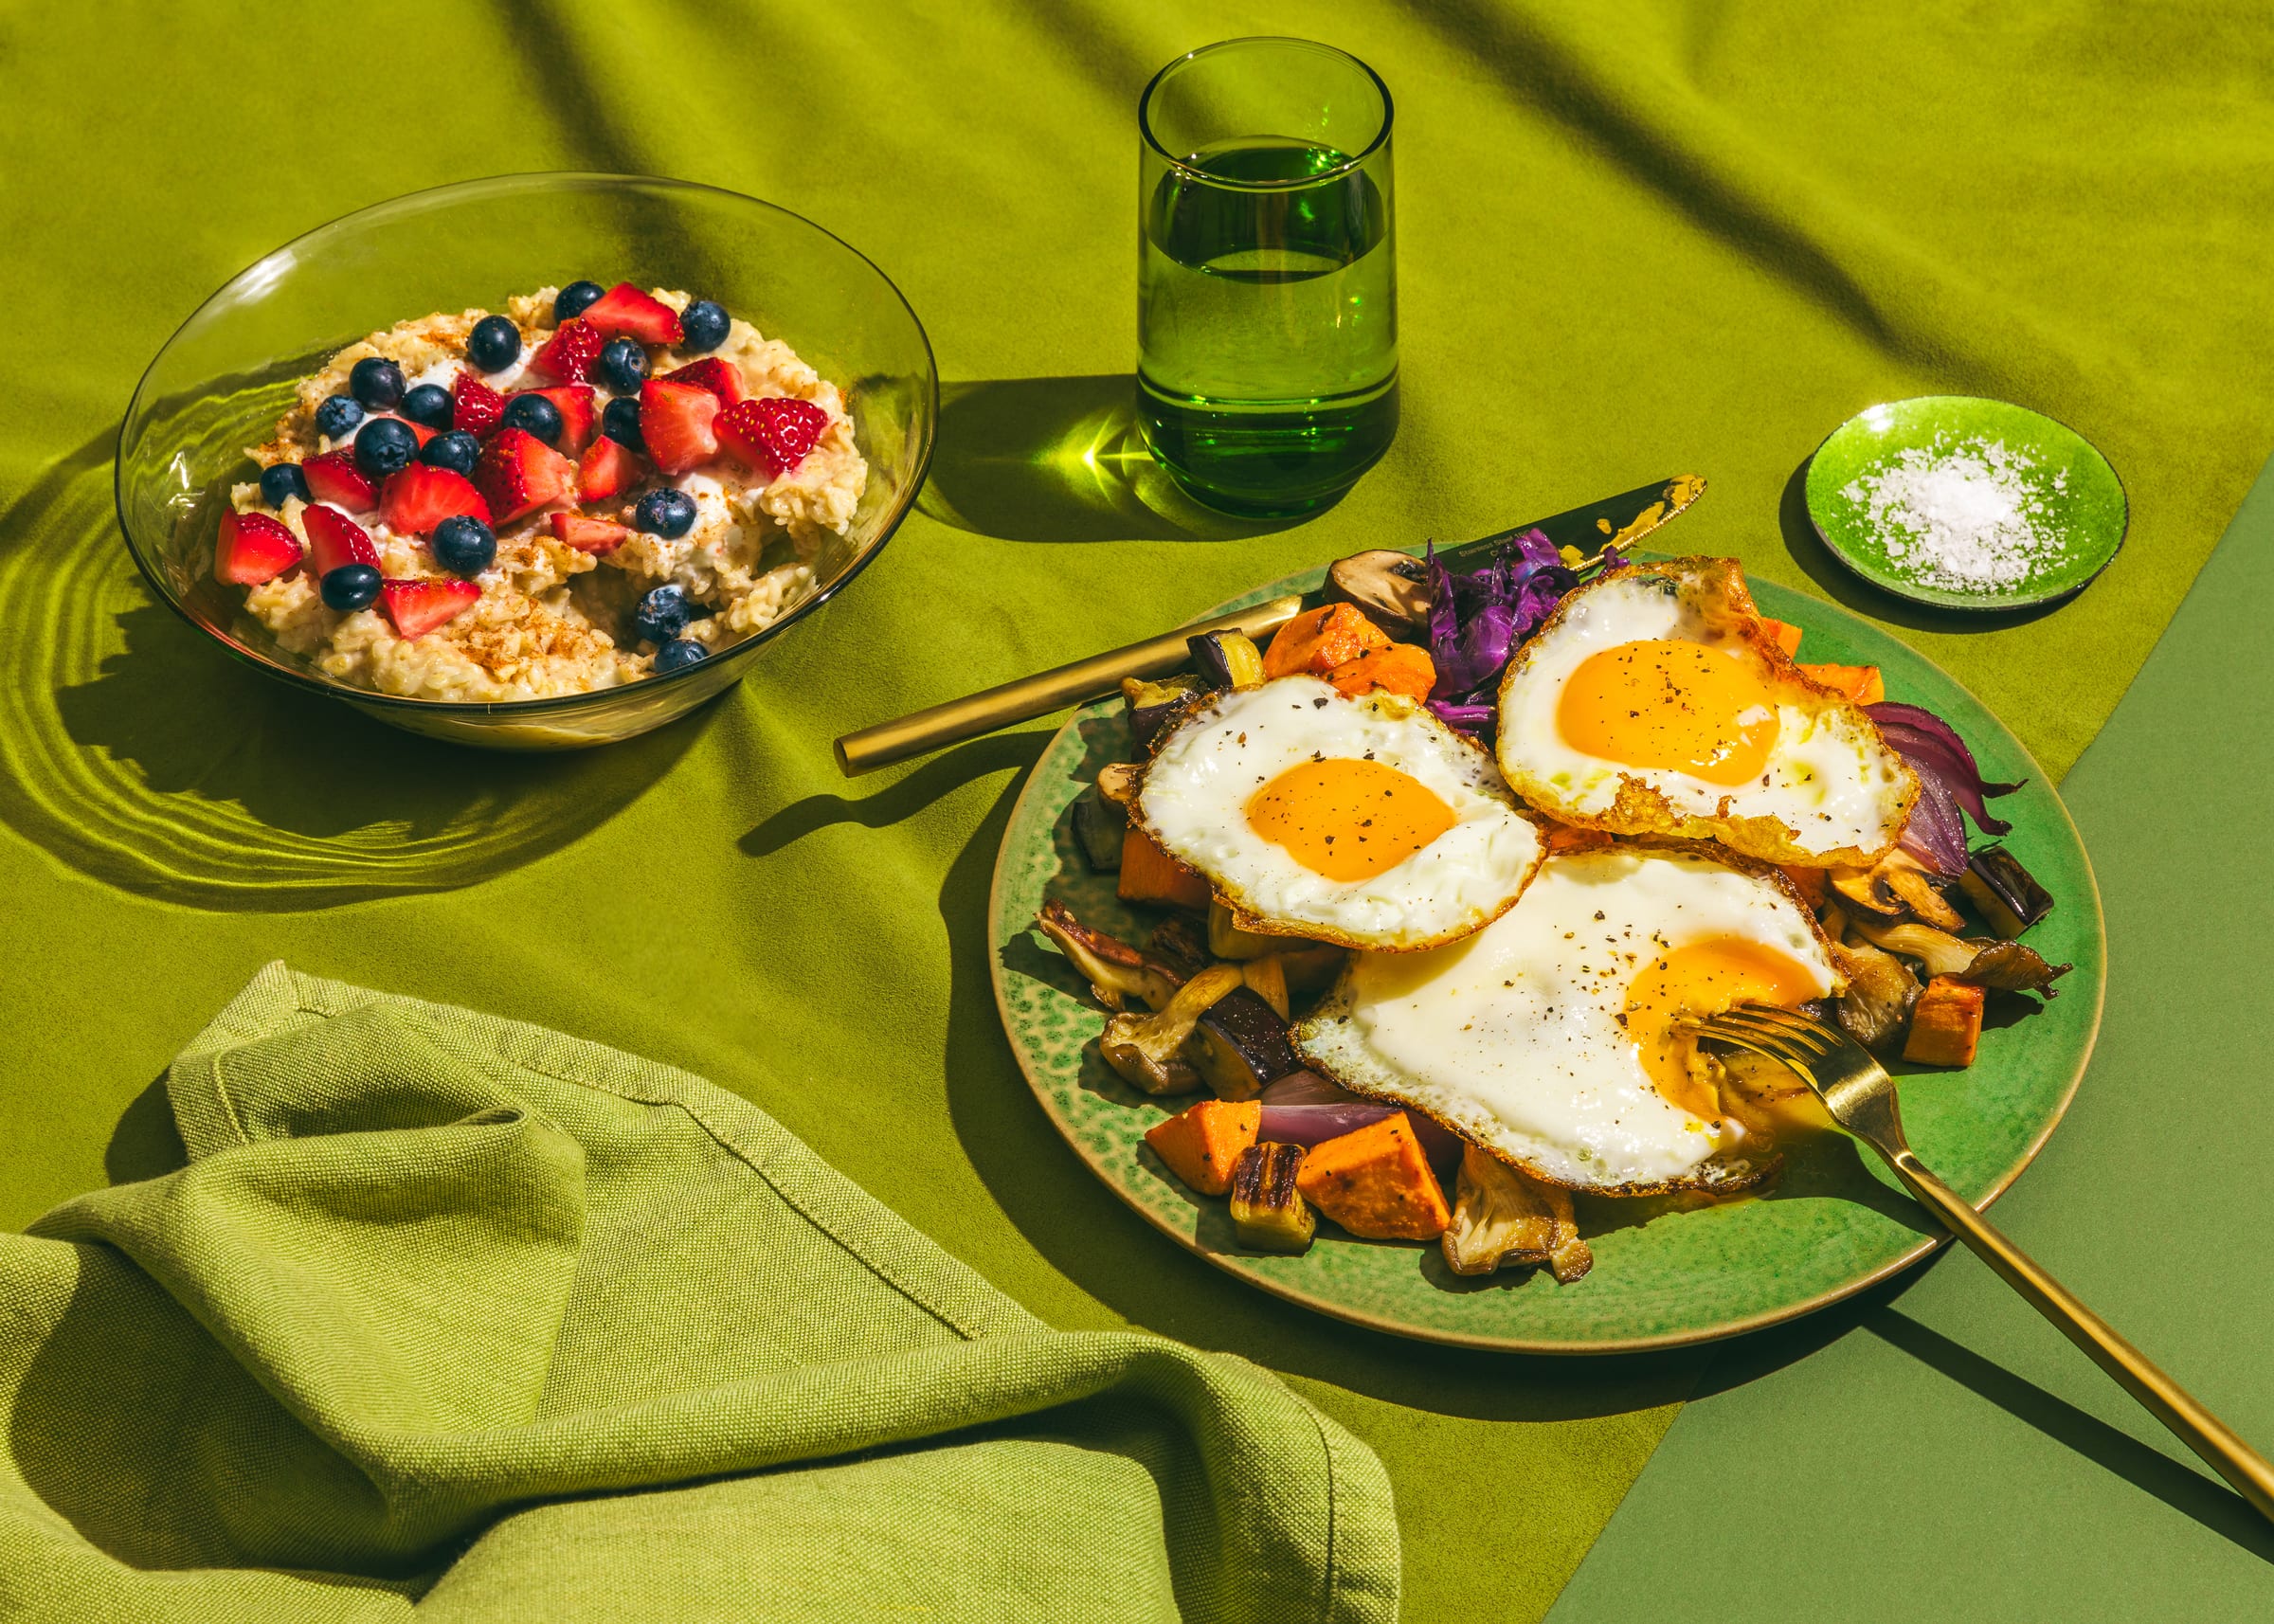 This Is What 6 CrossFit Games Athletes Eat for Breakfast